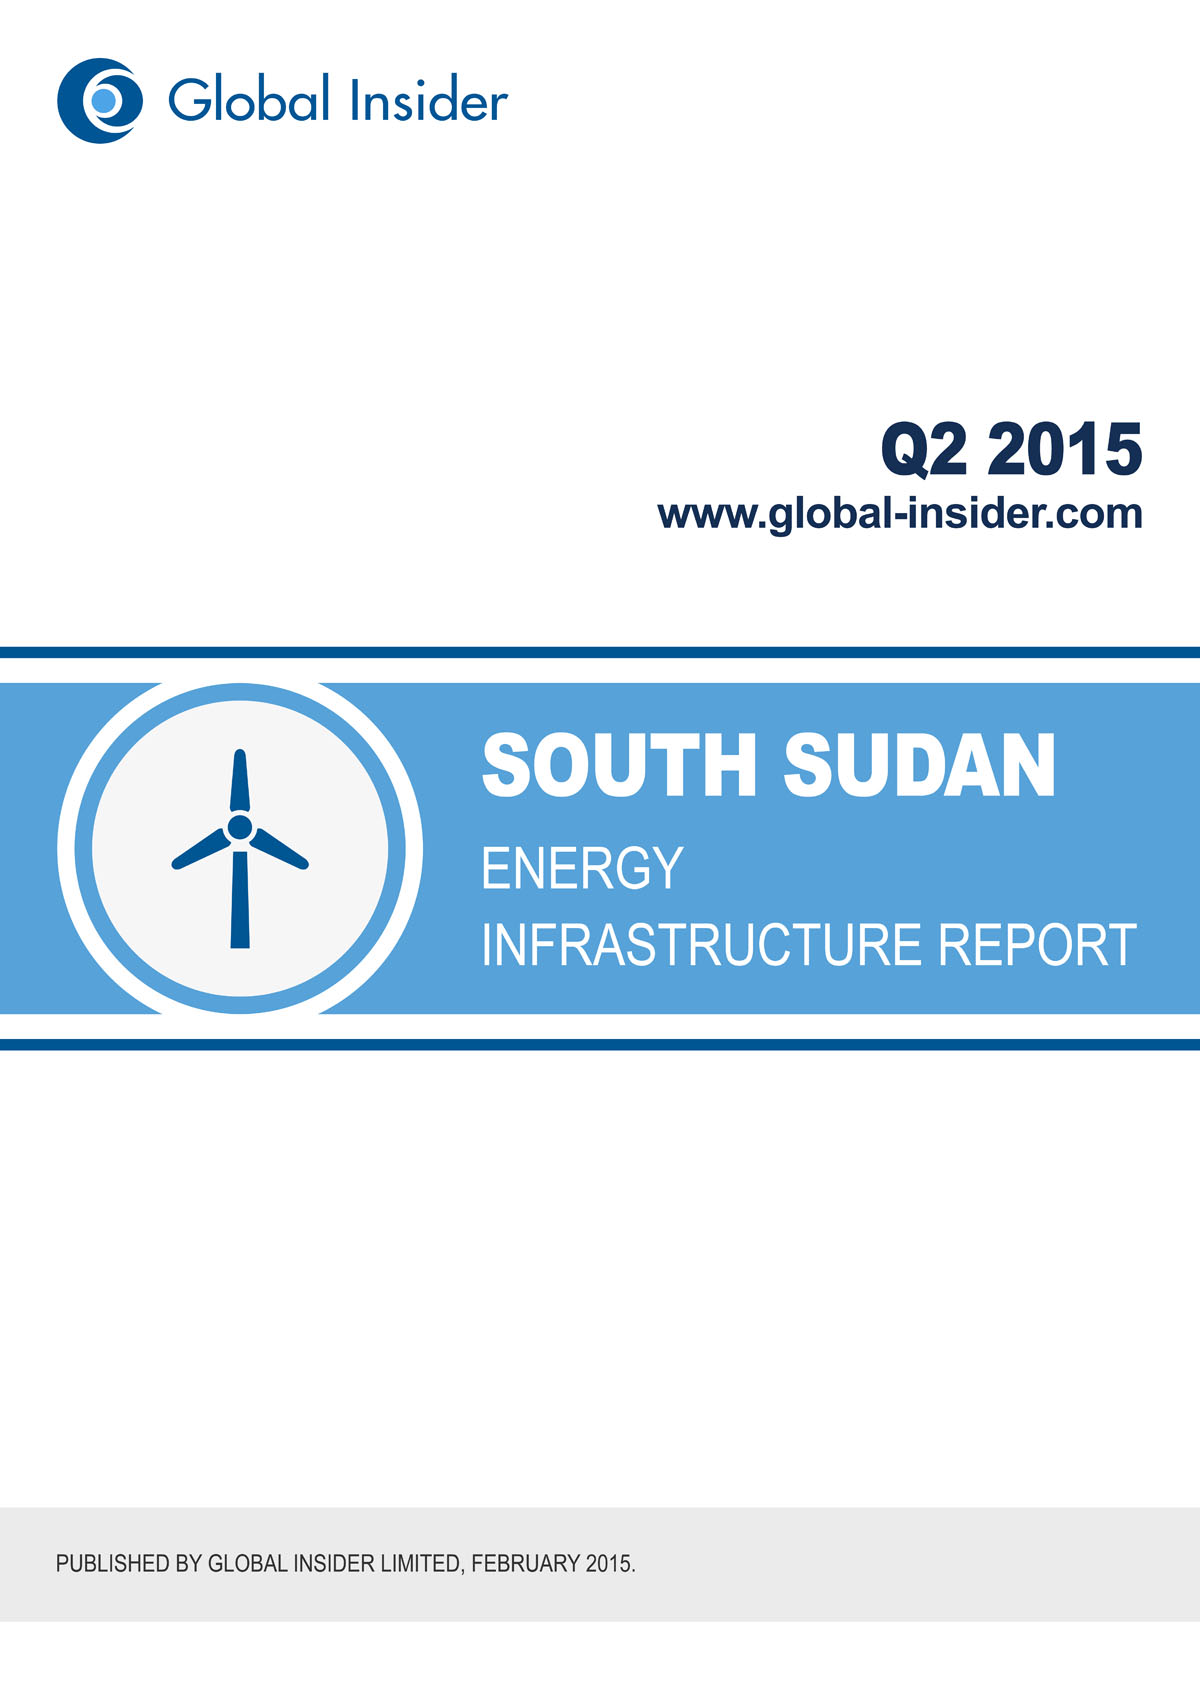 South Sudan Energy Infrastructure Report